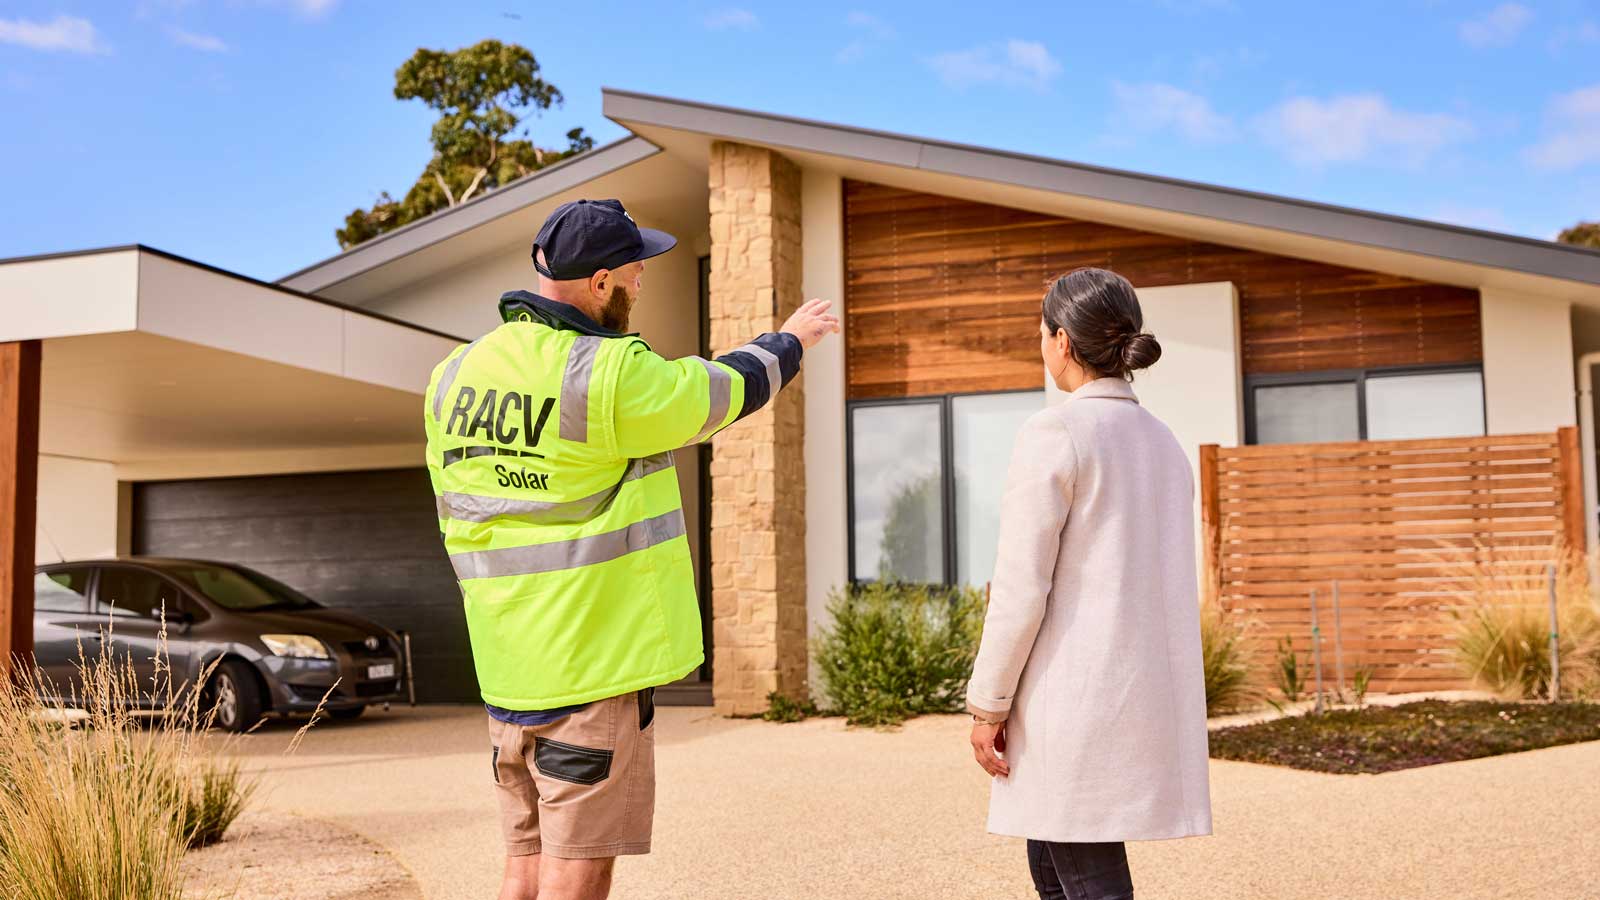 RACV solar installer and RACV customer talking in front of a house. 